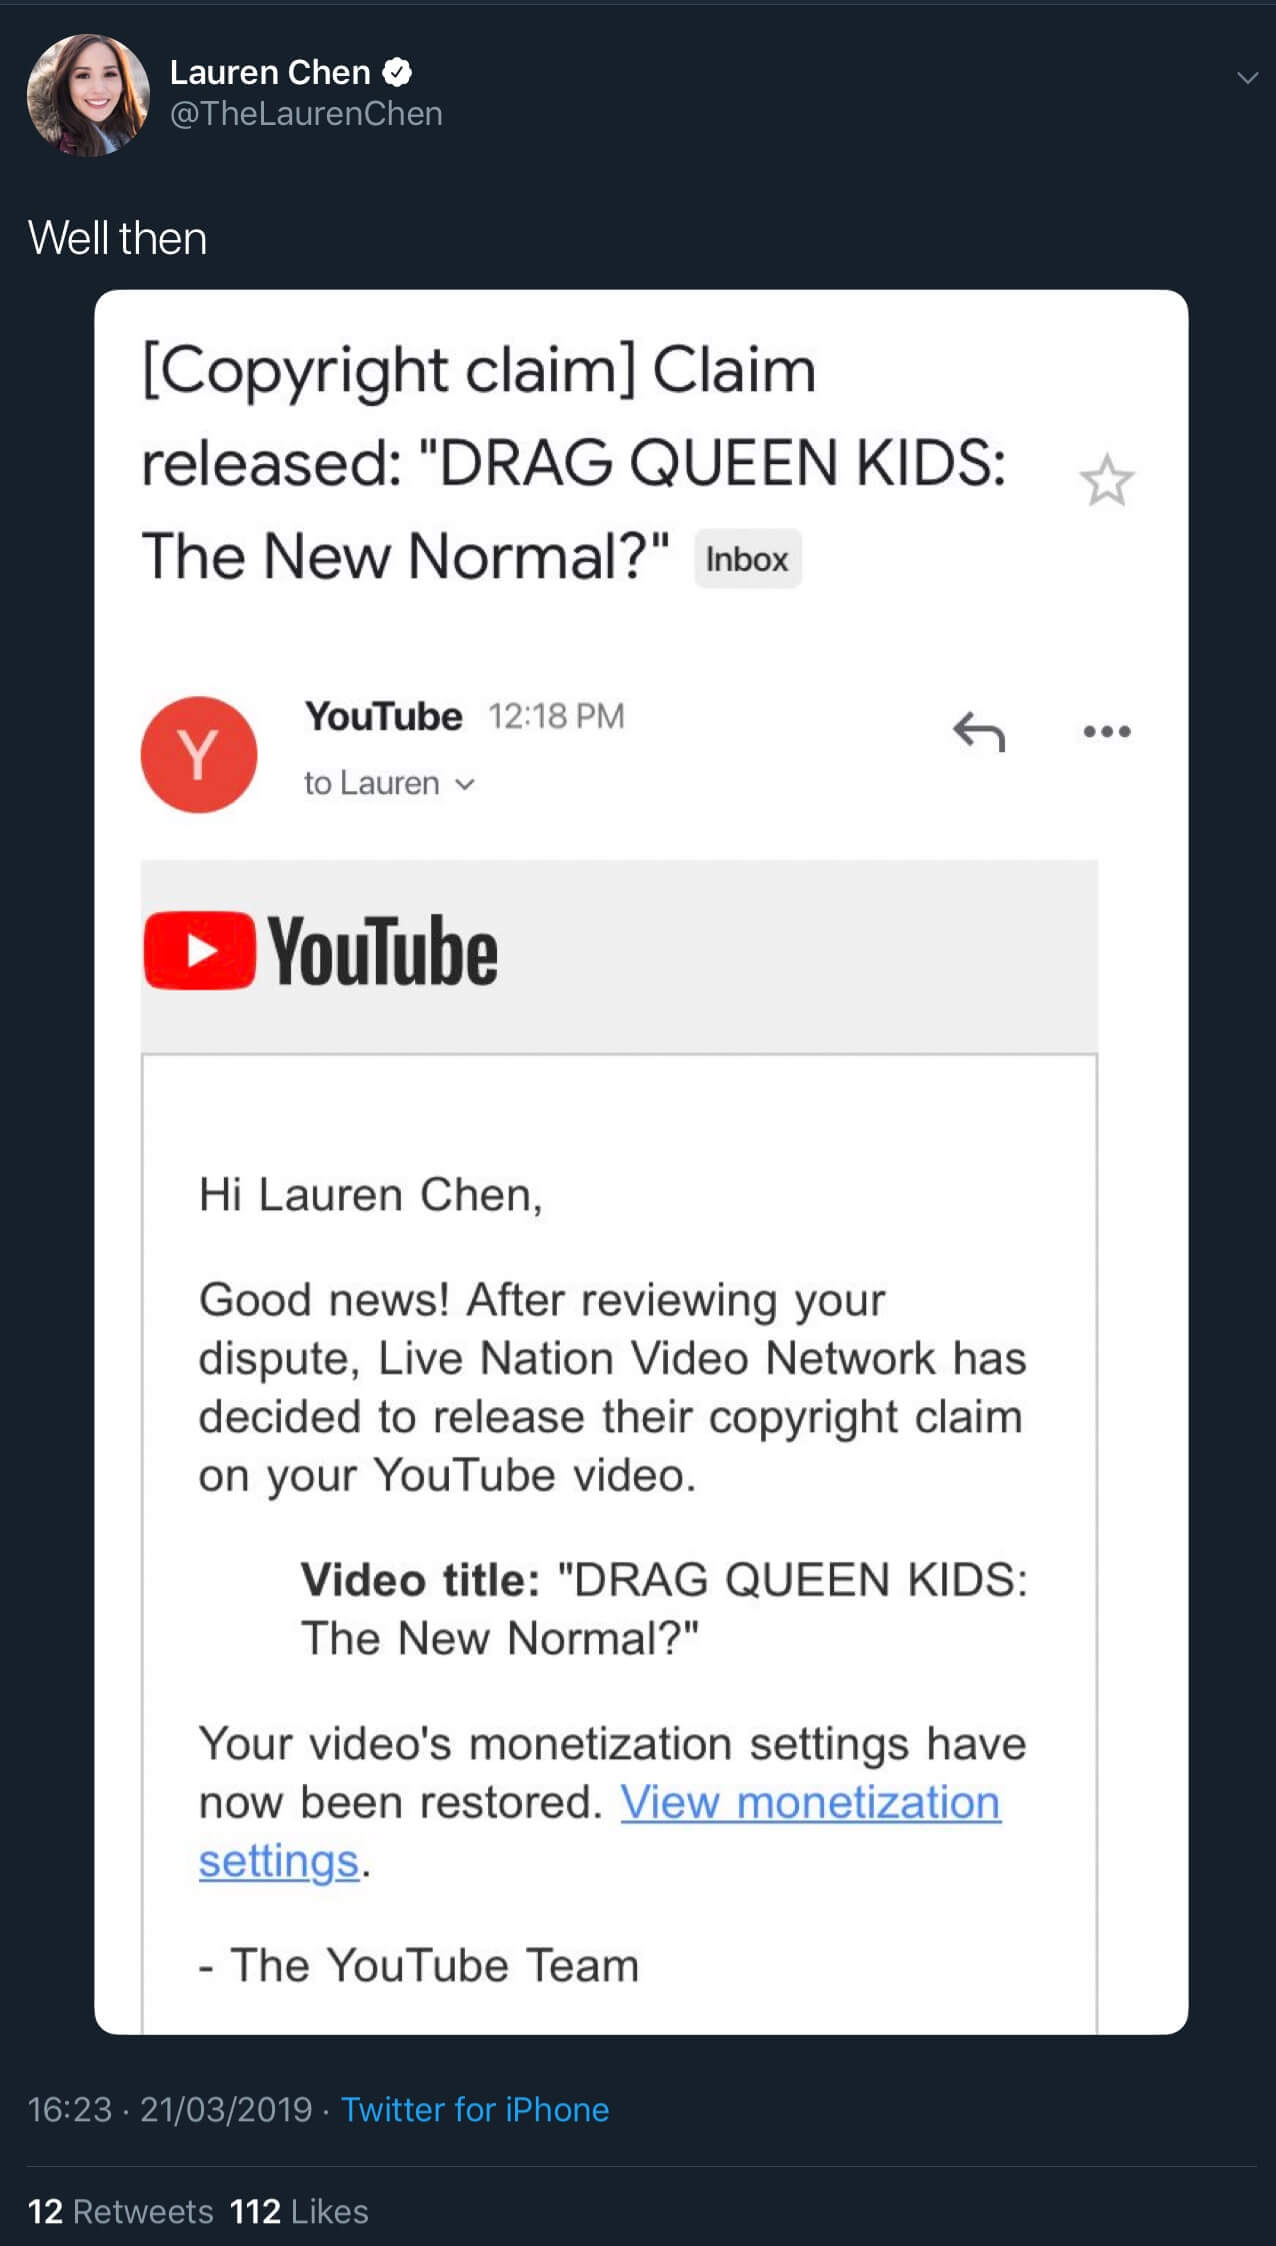 Alternative text: A tweet showing that the fake copyright claim against Lauren Chen’s video has been released.